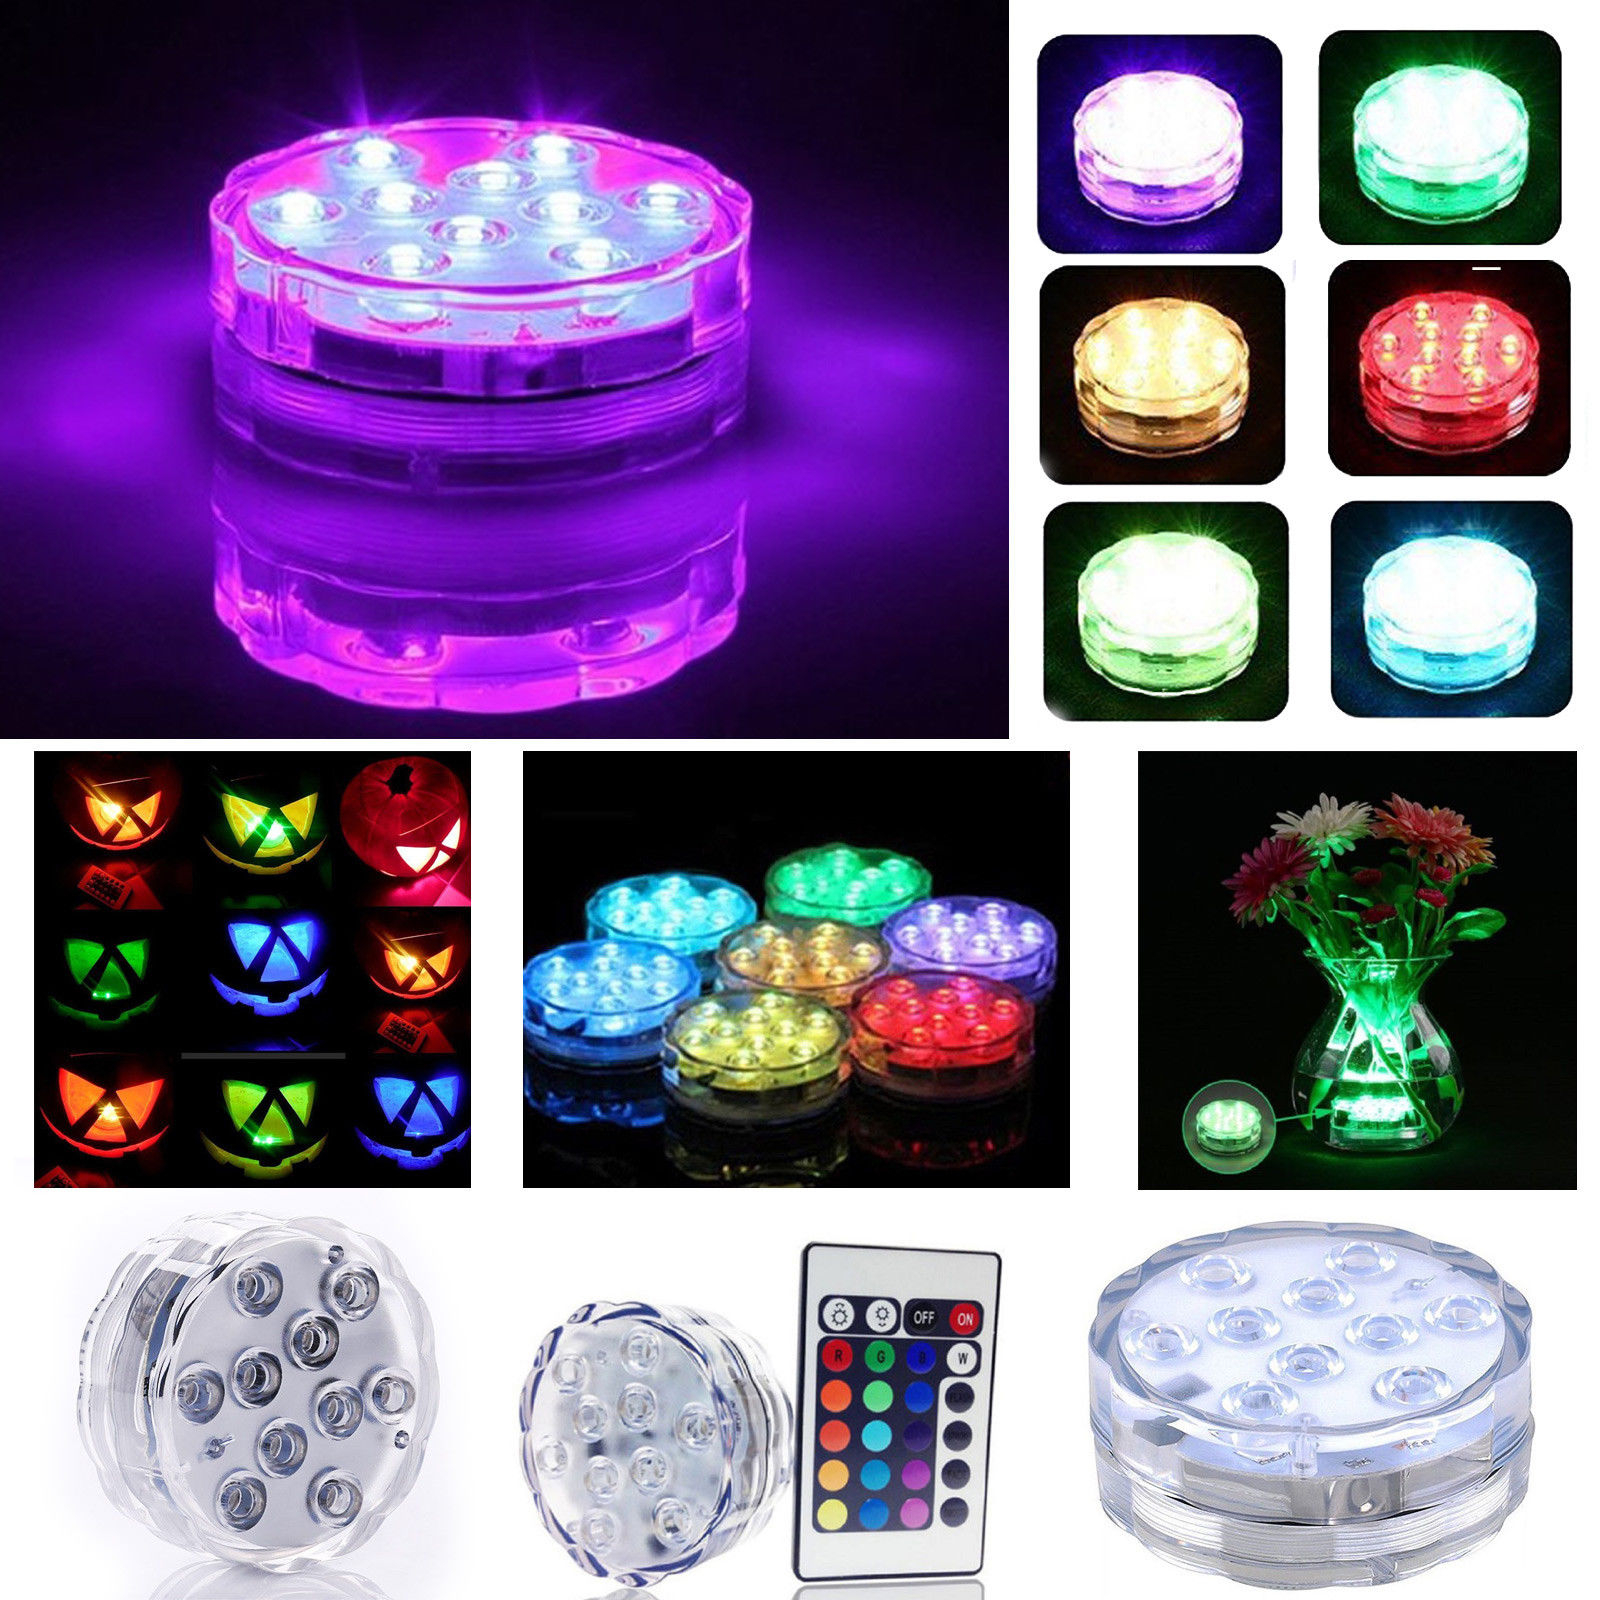 Waterproof 10 LED 7cm Remote Control Submersible Light Party Vase Lamp RGB 